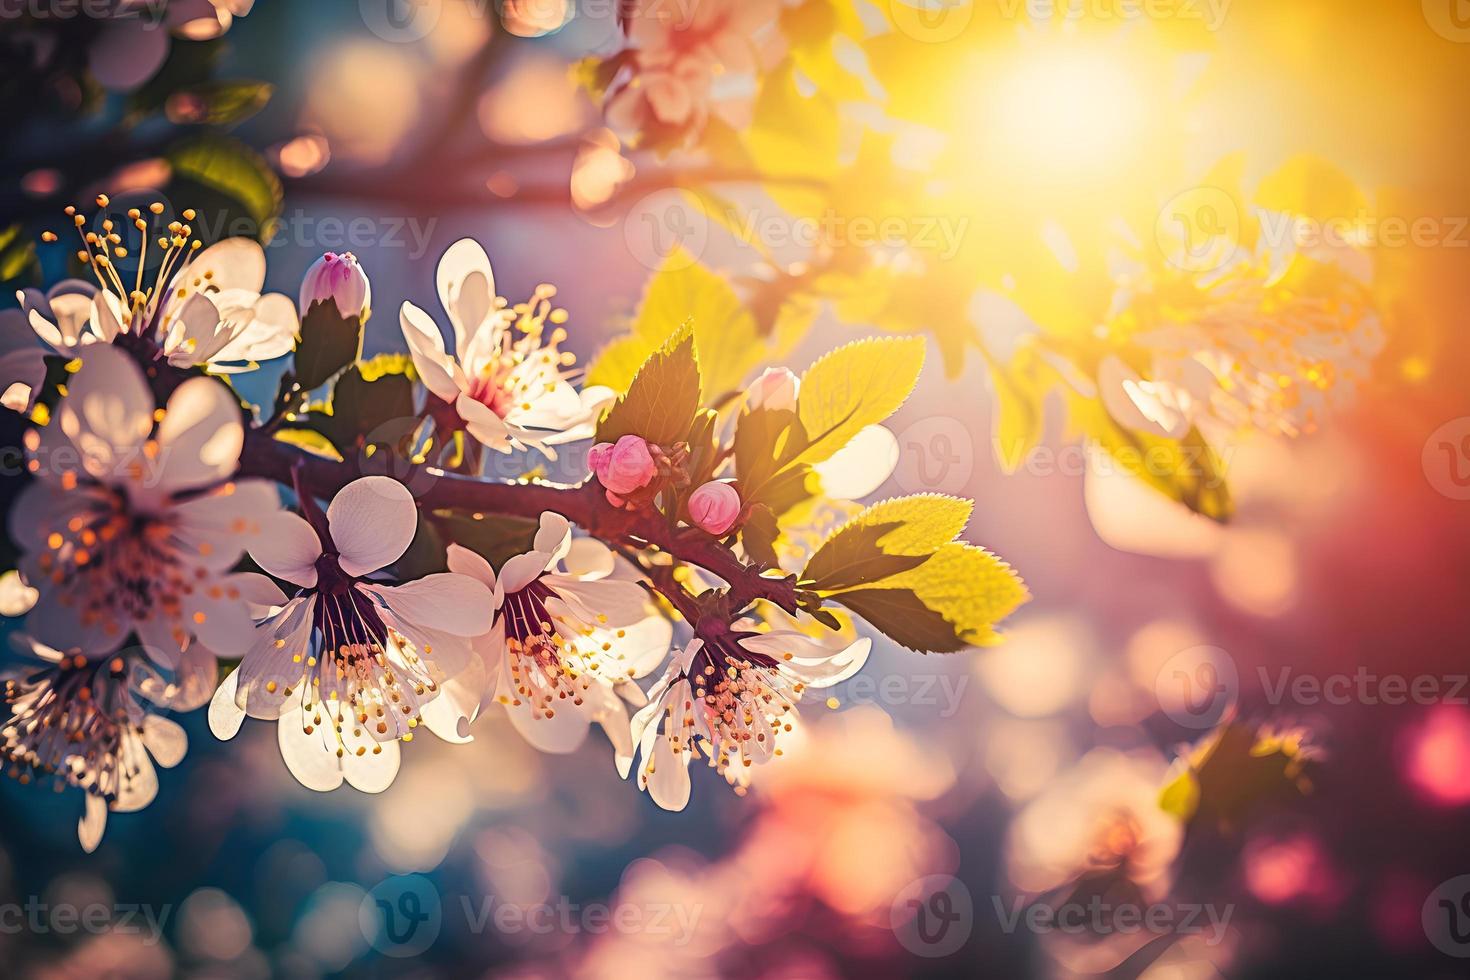 Spring blossom background. Nature scene with blooming tree and sun flare. Spring flowers. Beautiful orchard Photography photo